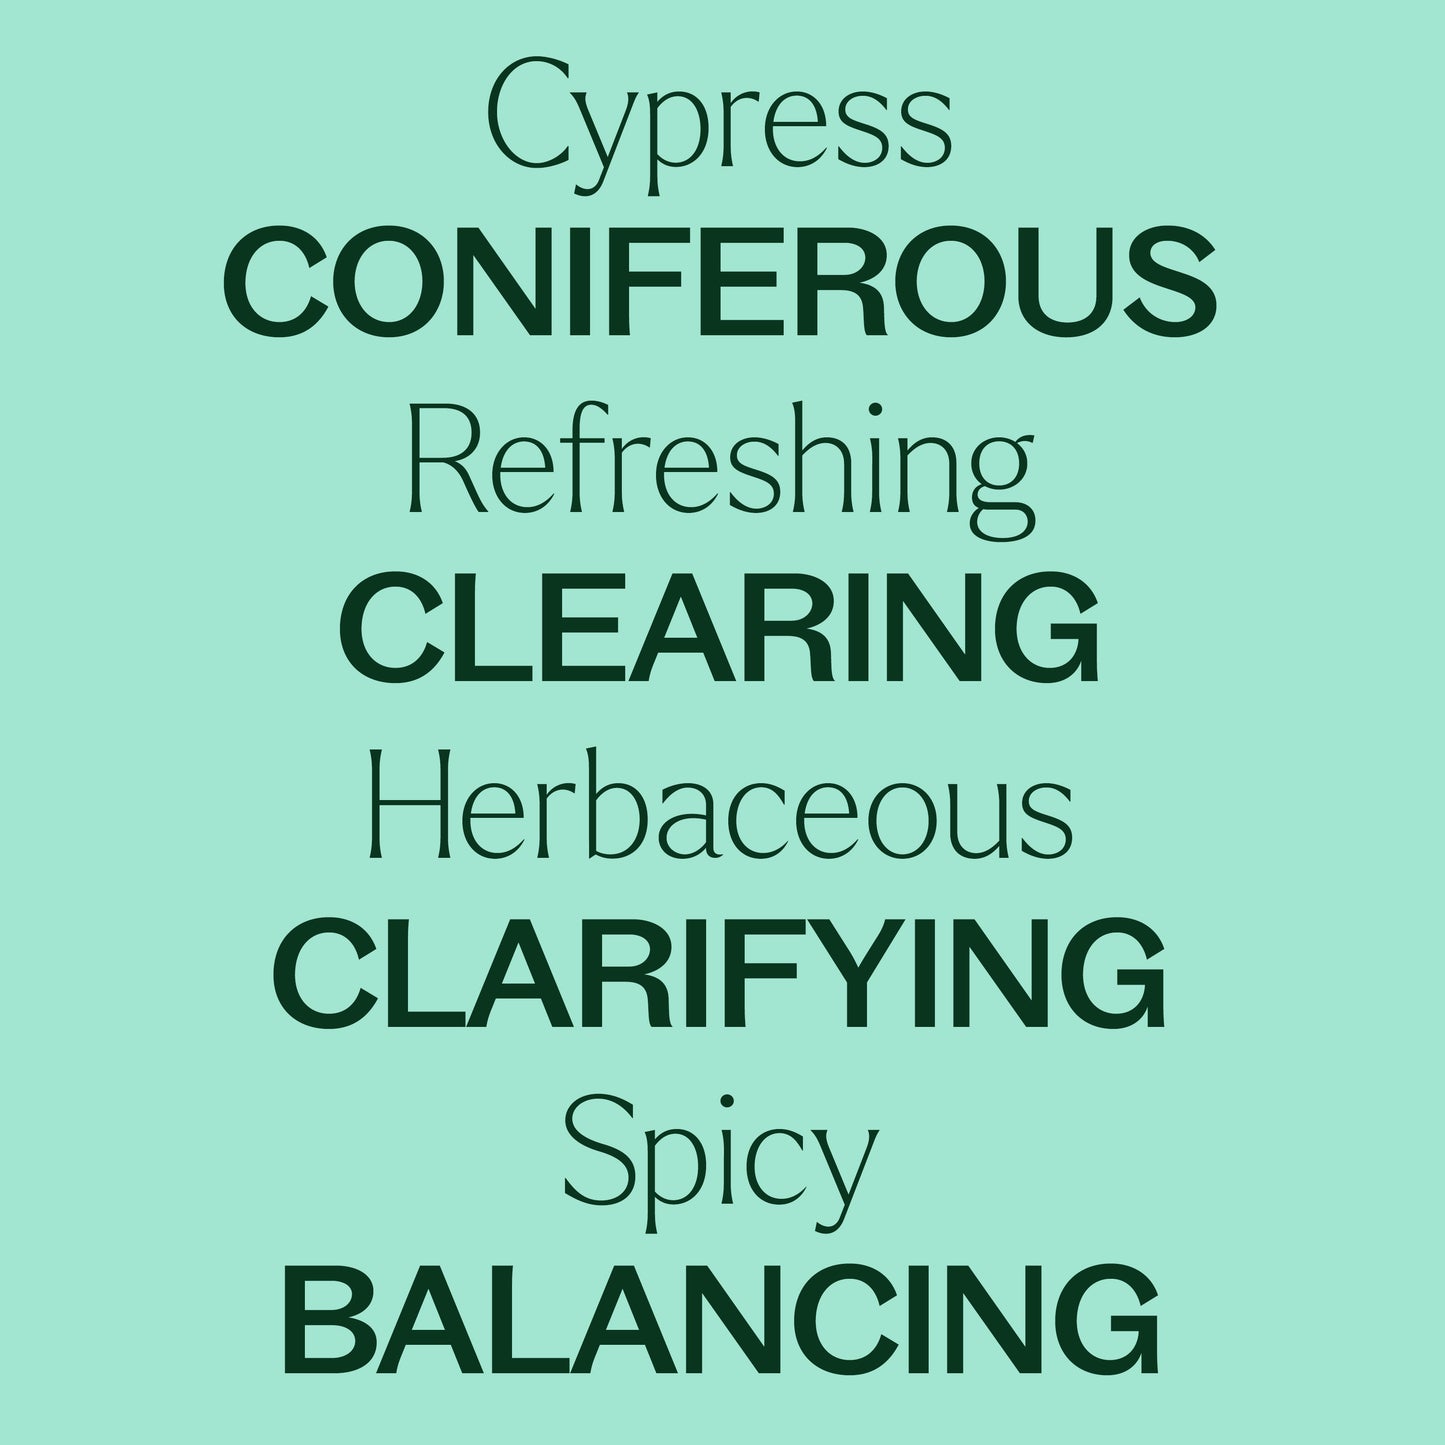 Key features of Cypress Essential Oil: Coniferous, refreshing, clearing, herbaceous, clarifying, spicy, and balancing